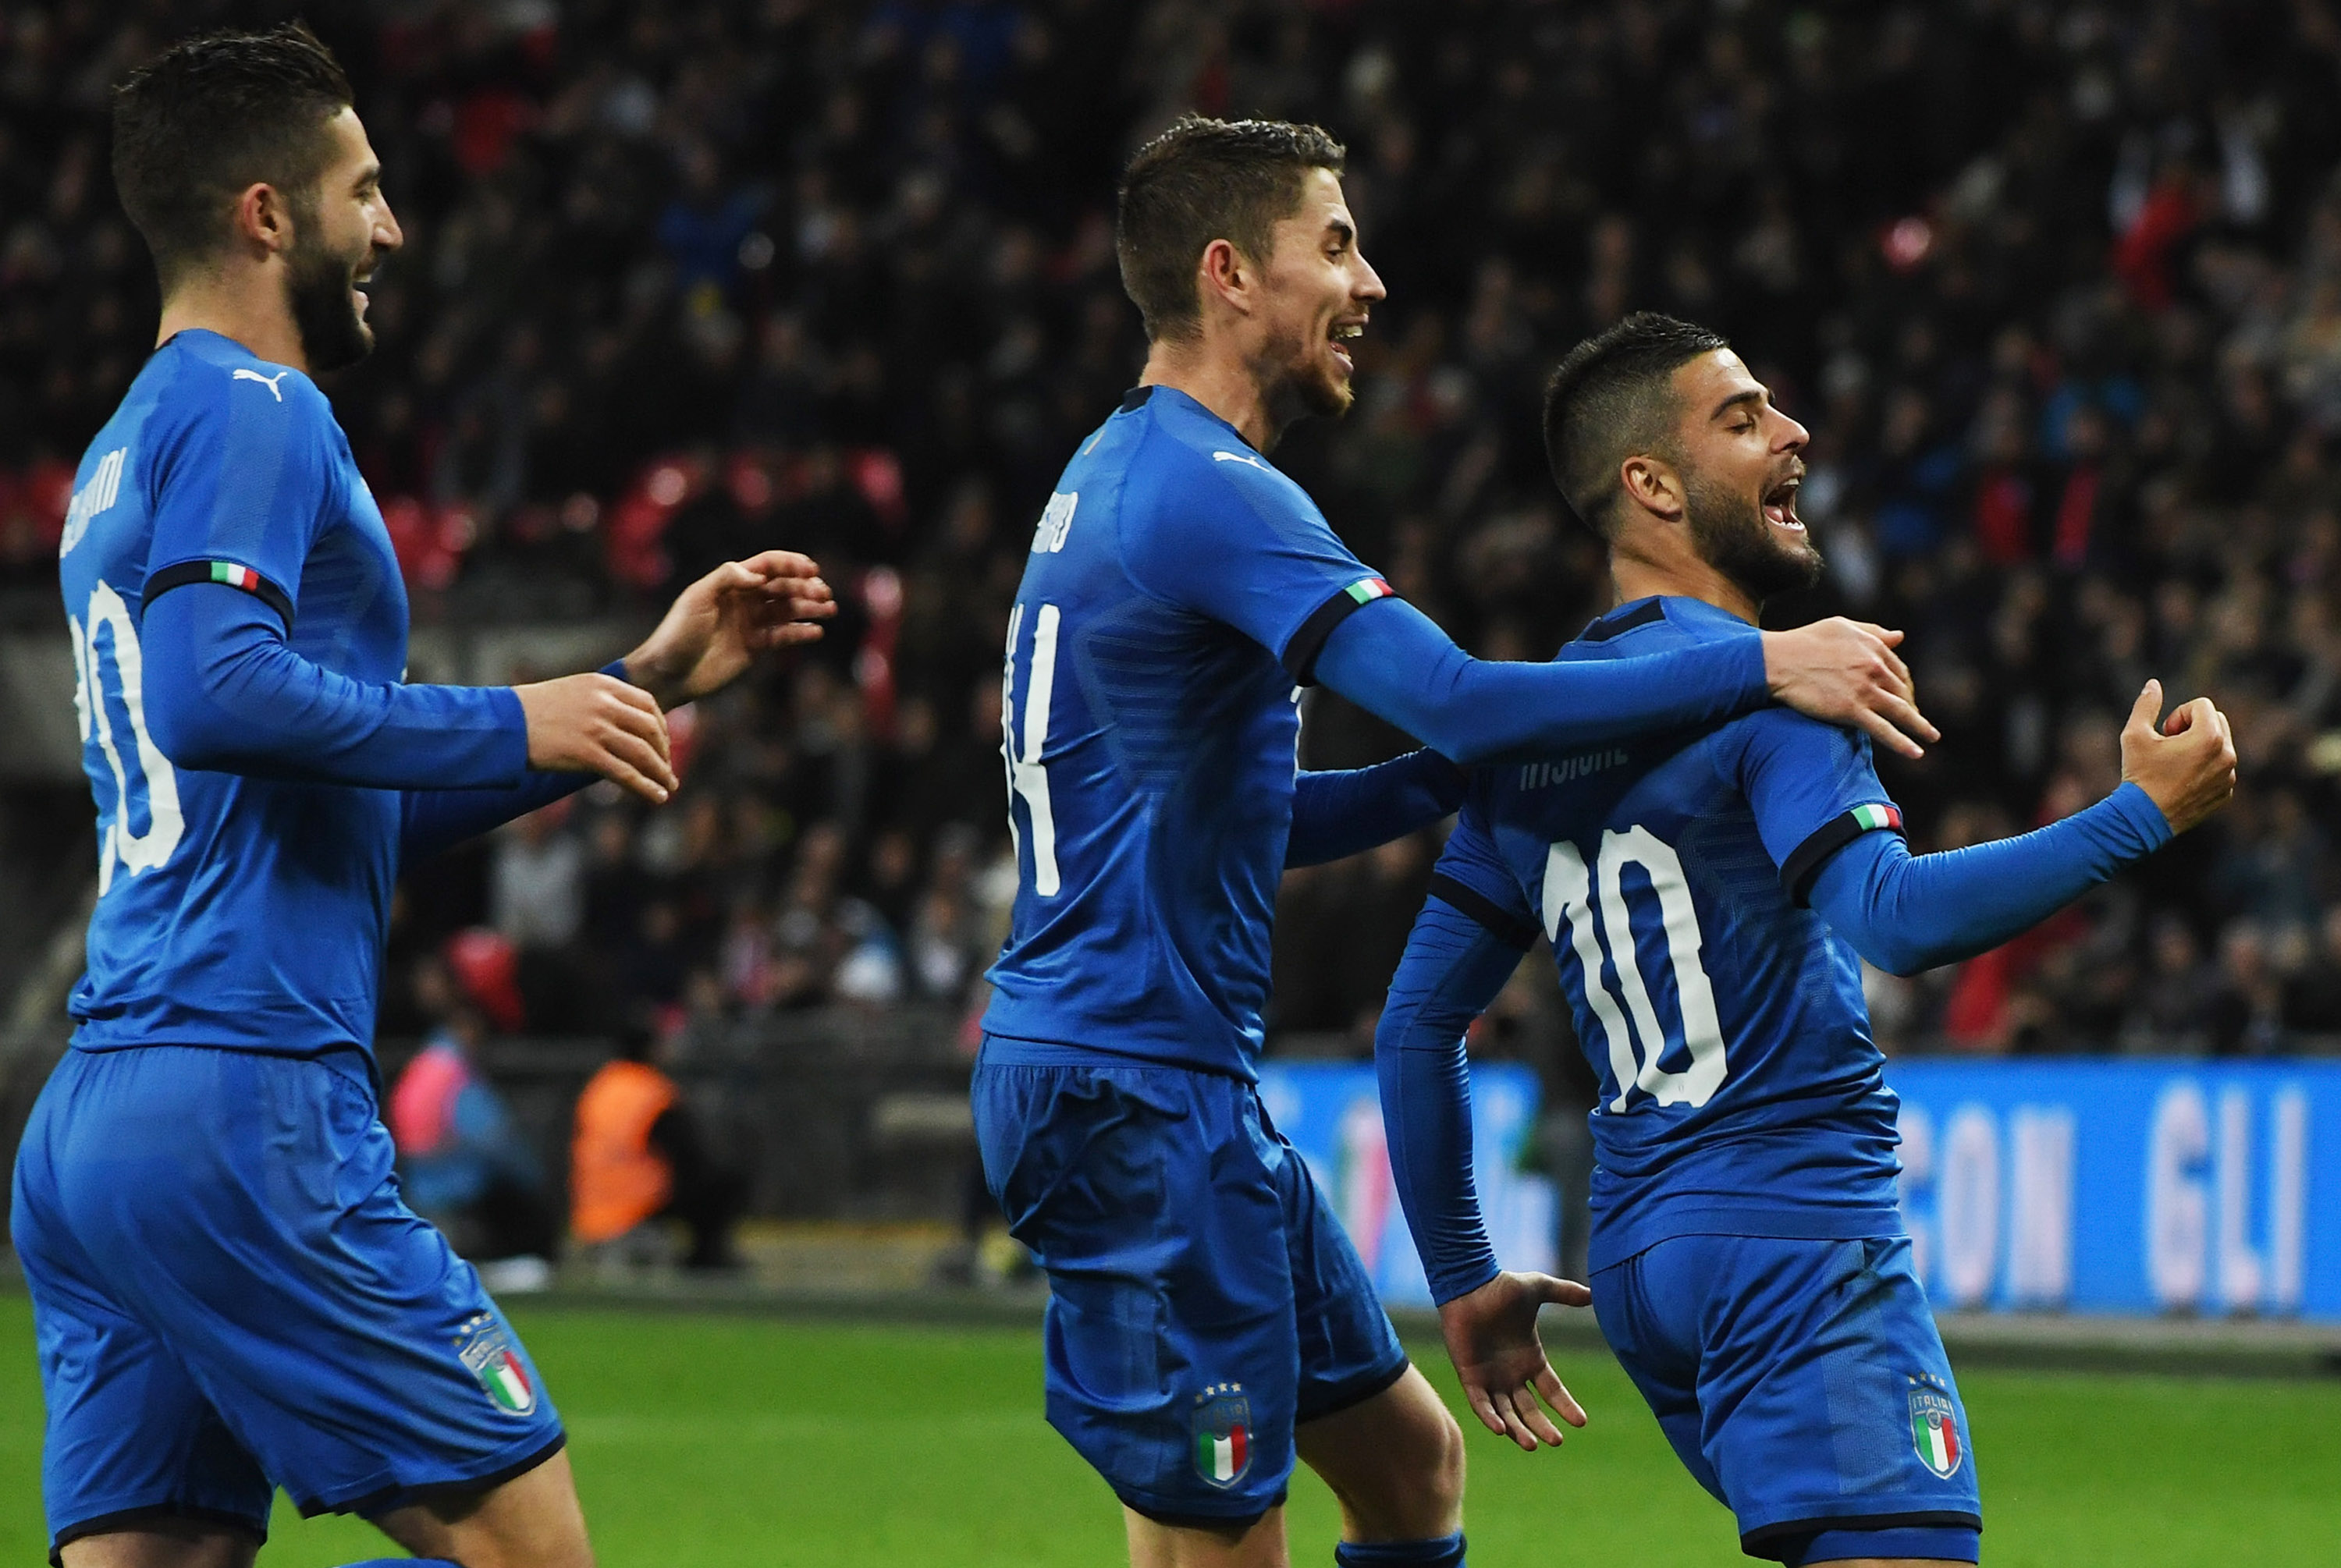 Insigne will be key for Italy (Picture Courtesy - AFP/Getty Images)